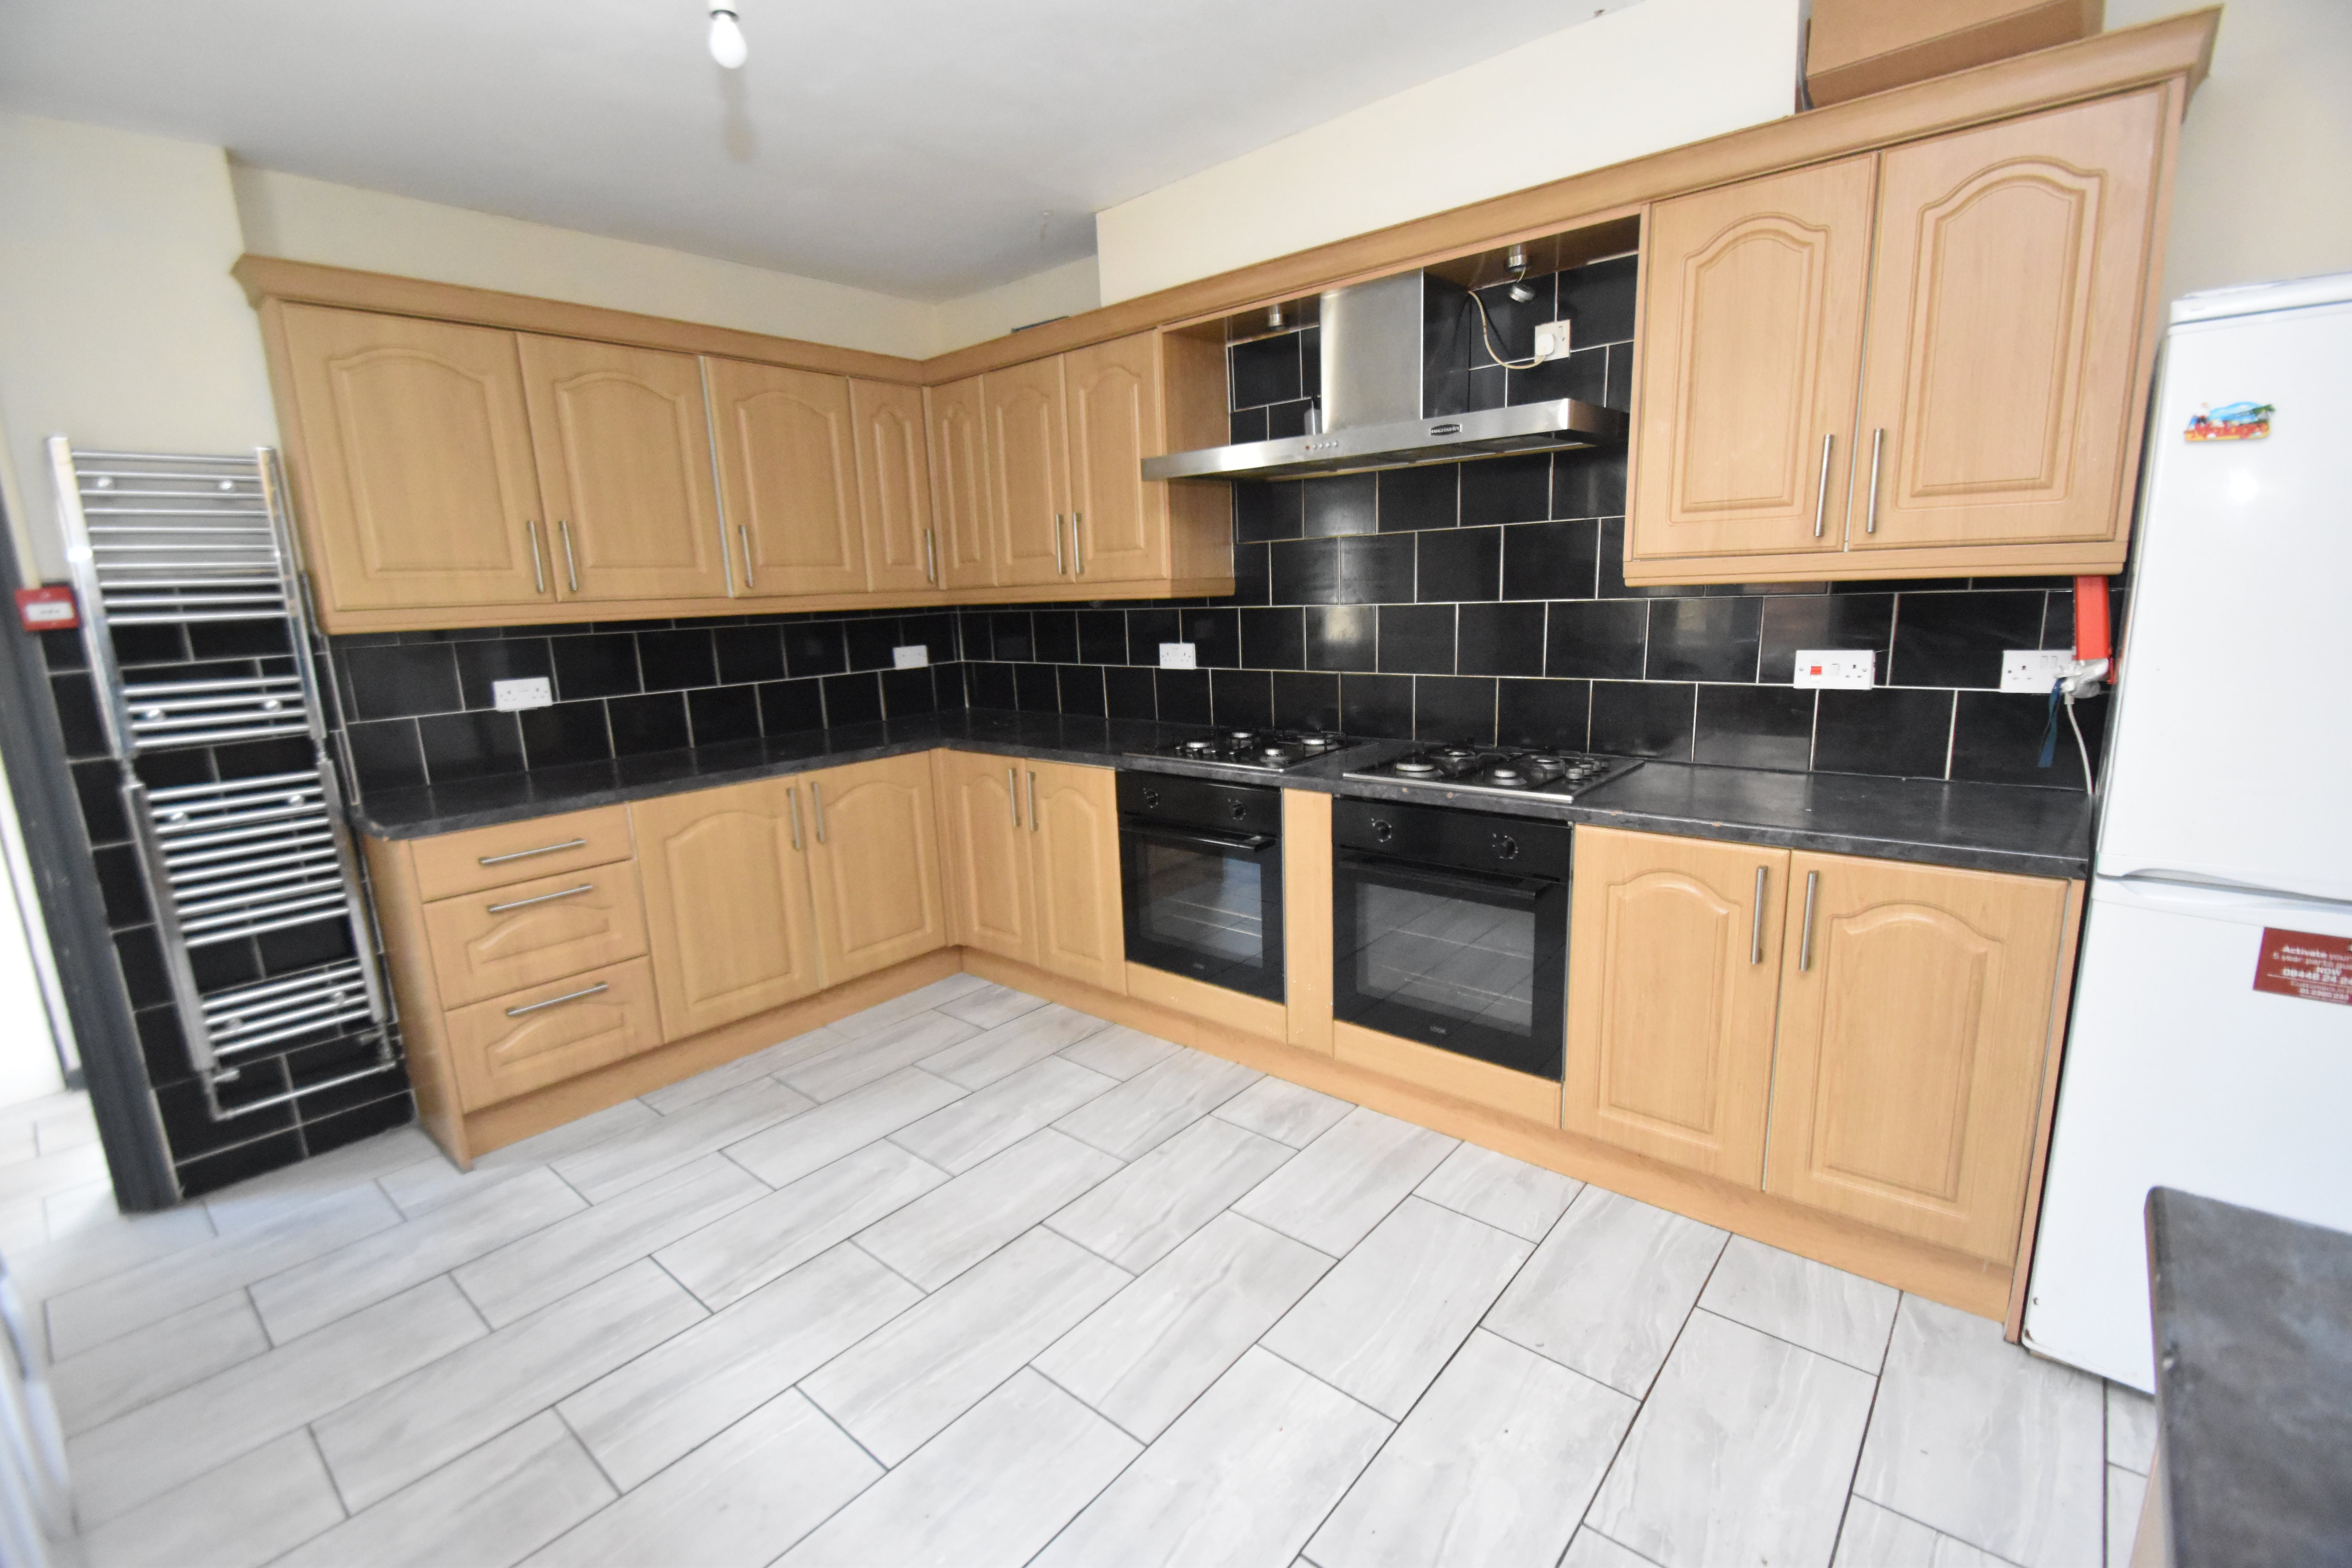 8 bed house to rent in Harriet Street, CATHAYS 2